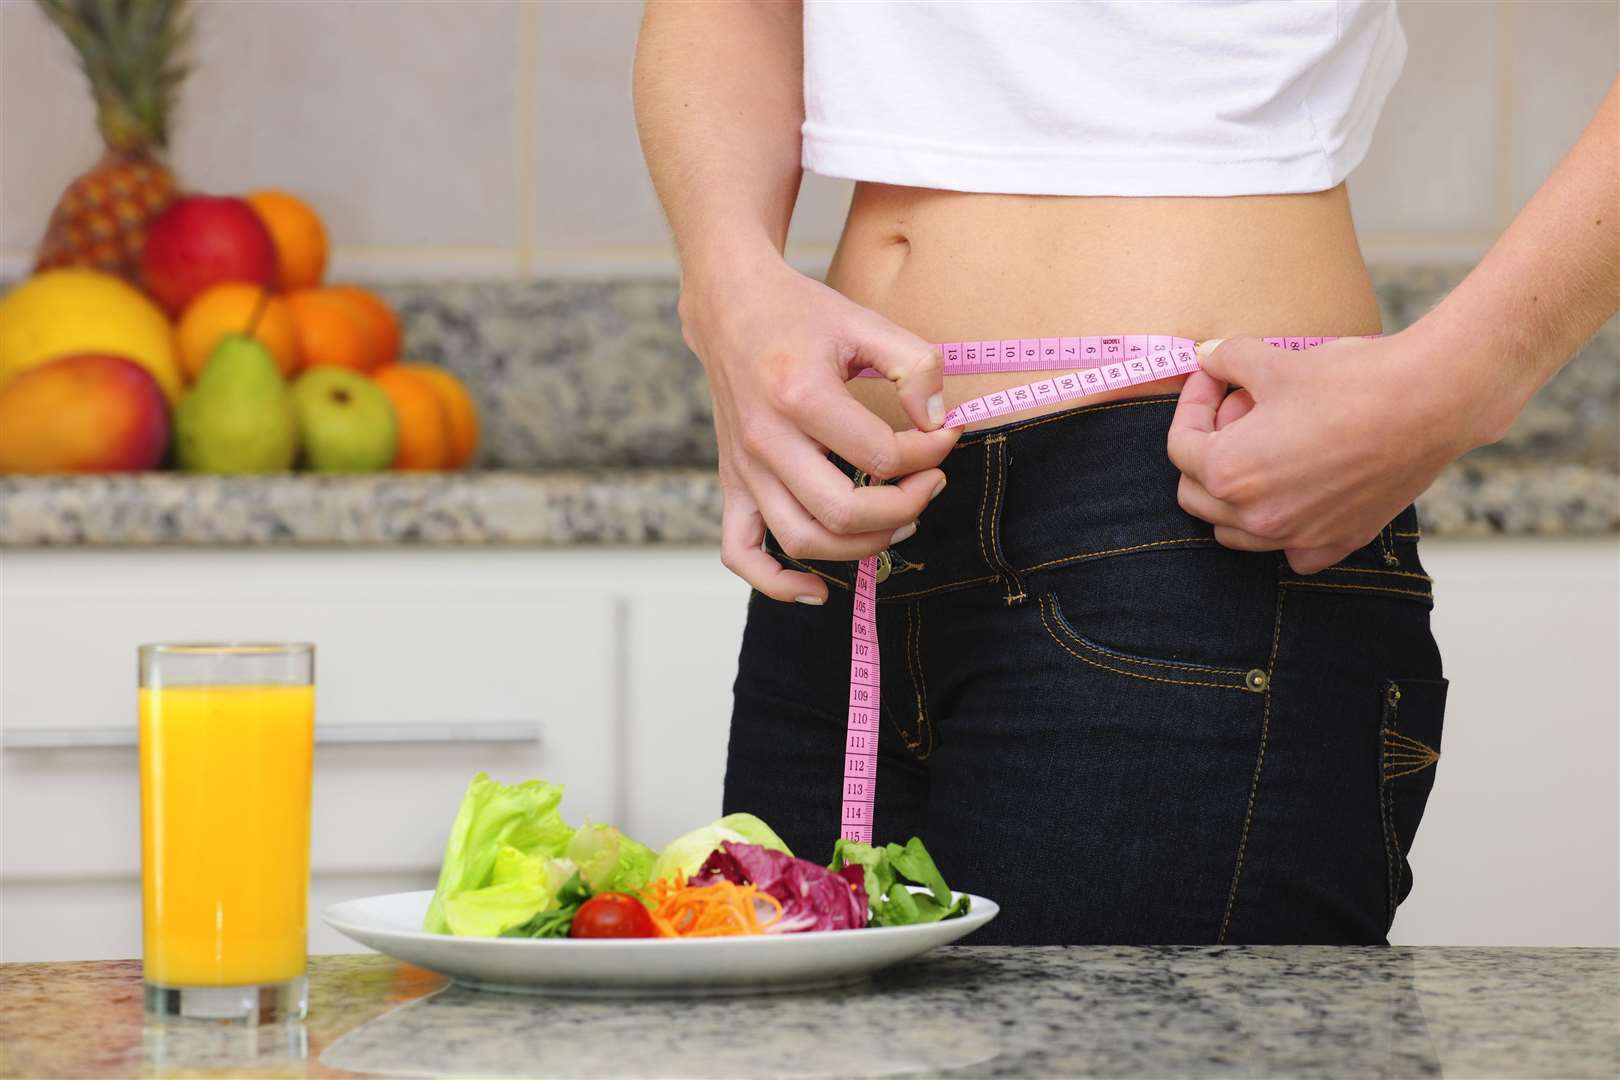 66 people in Medway are being treated for eating disorders Picture: Thinkstock Image Library